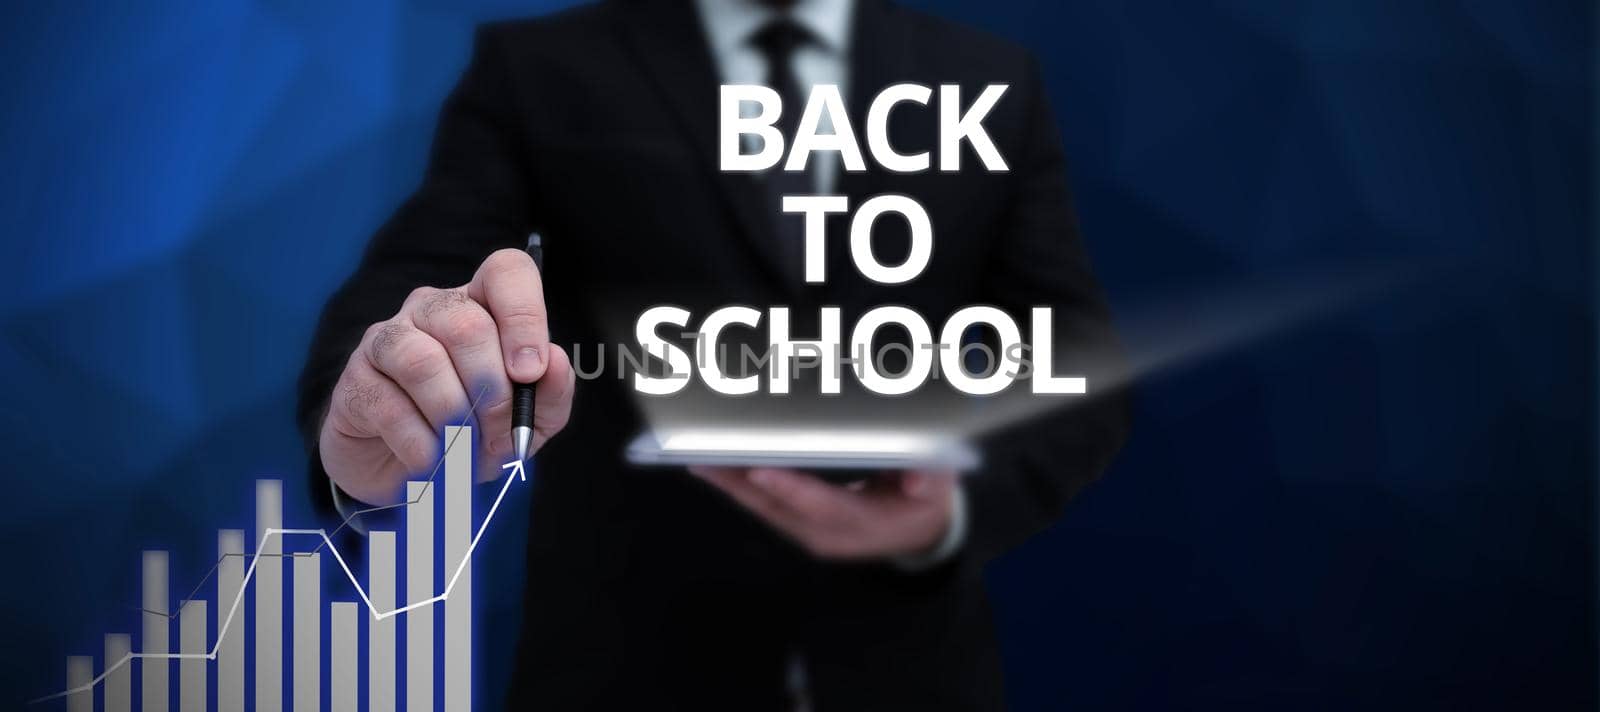 Text sign showing Back To School, Concept meaning New Teachers Friends Books Uniforms Promotion Tuition Fee Empty Thought Bubbles With Copy Space For Business Advertisement.